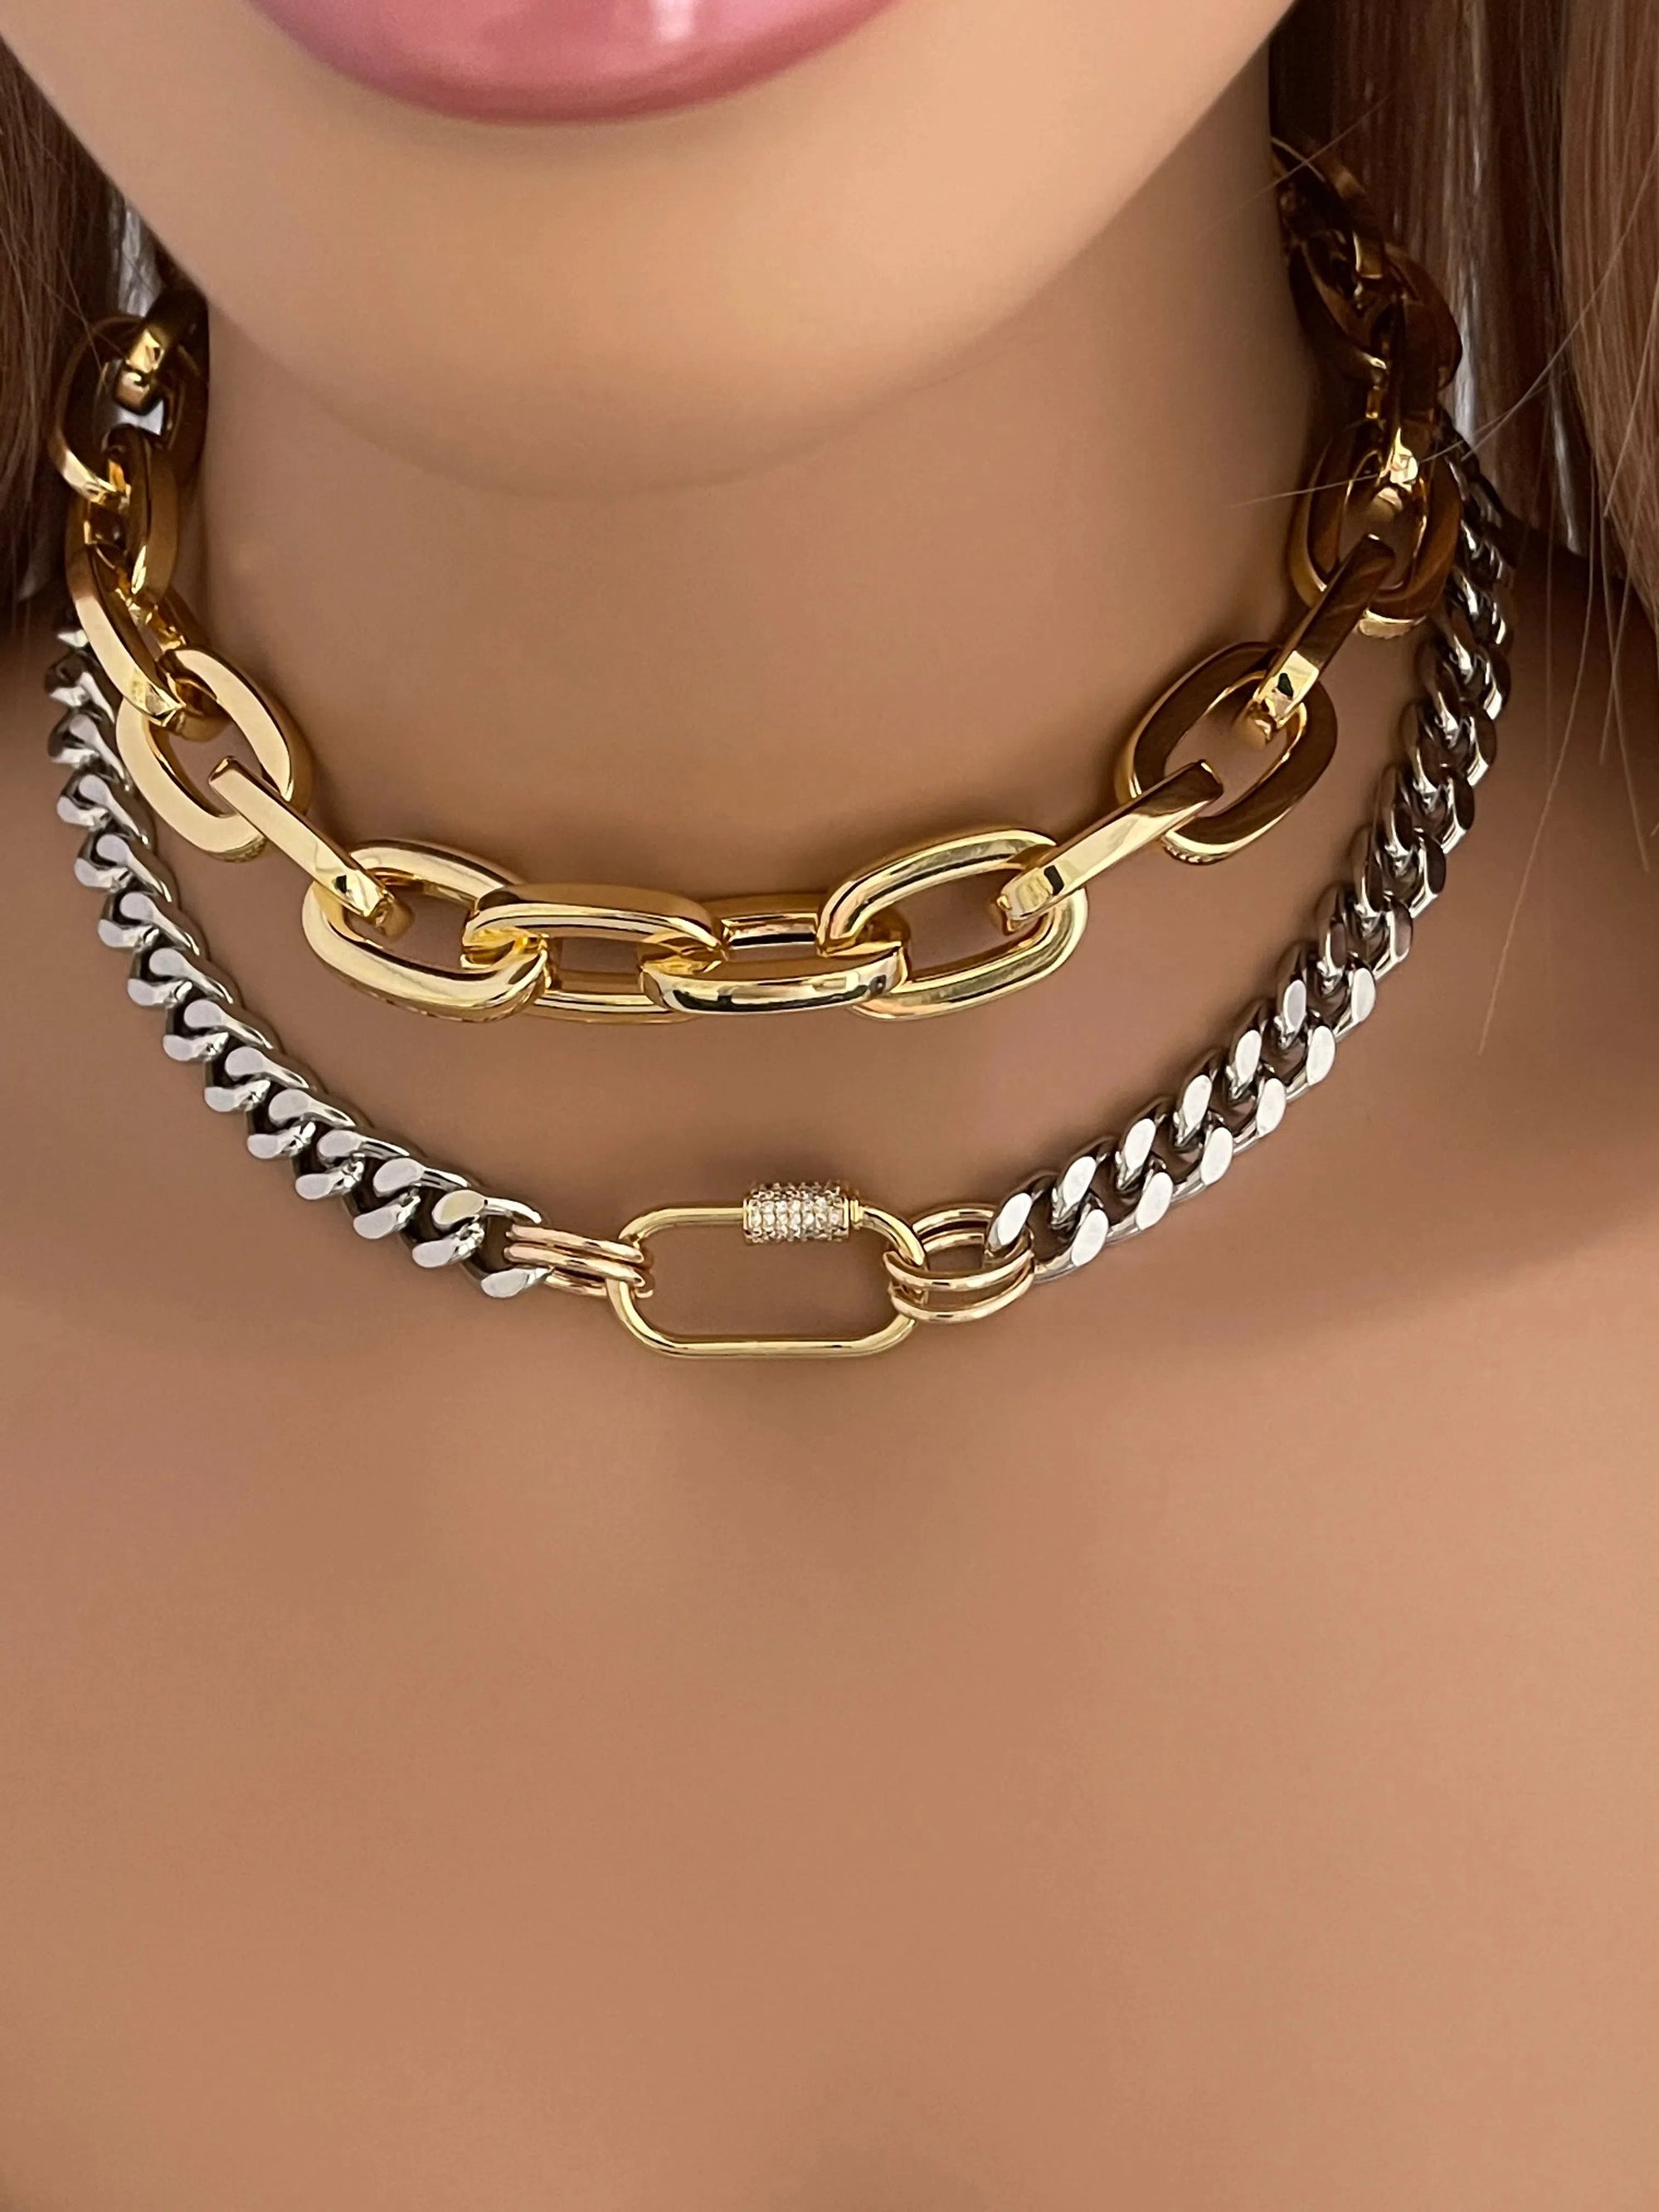 Layering Chain Necklaces-Mixed Metal -Large Link Gold Chain - Cuban Chain Carabiner Necklace